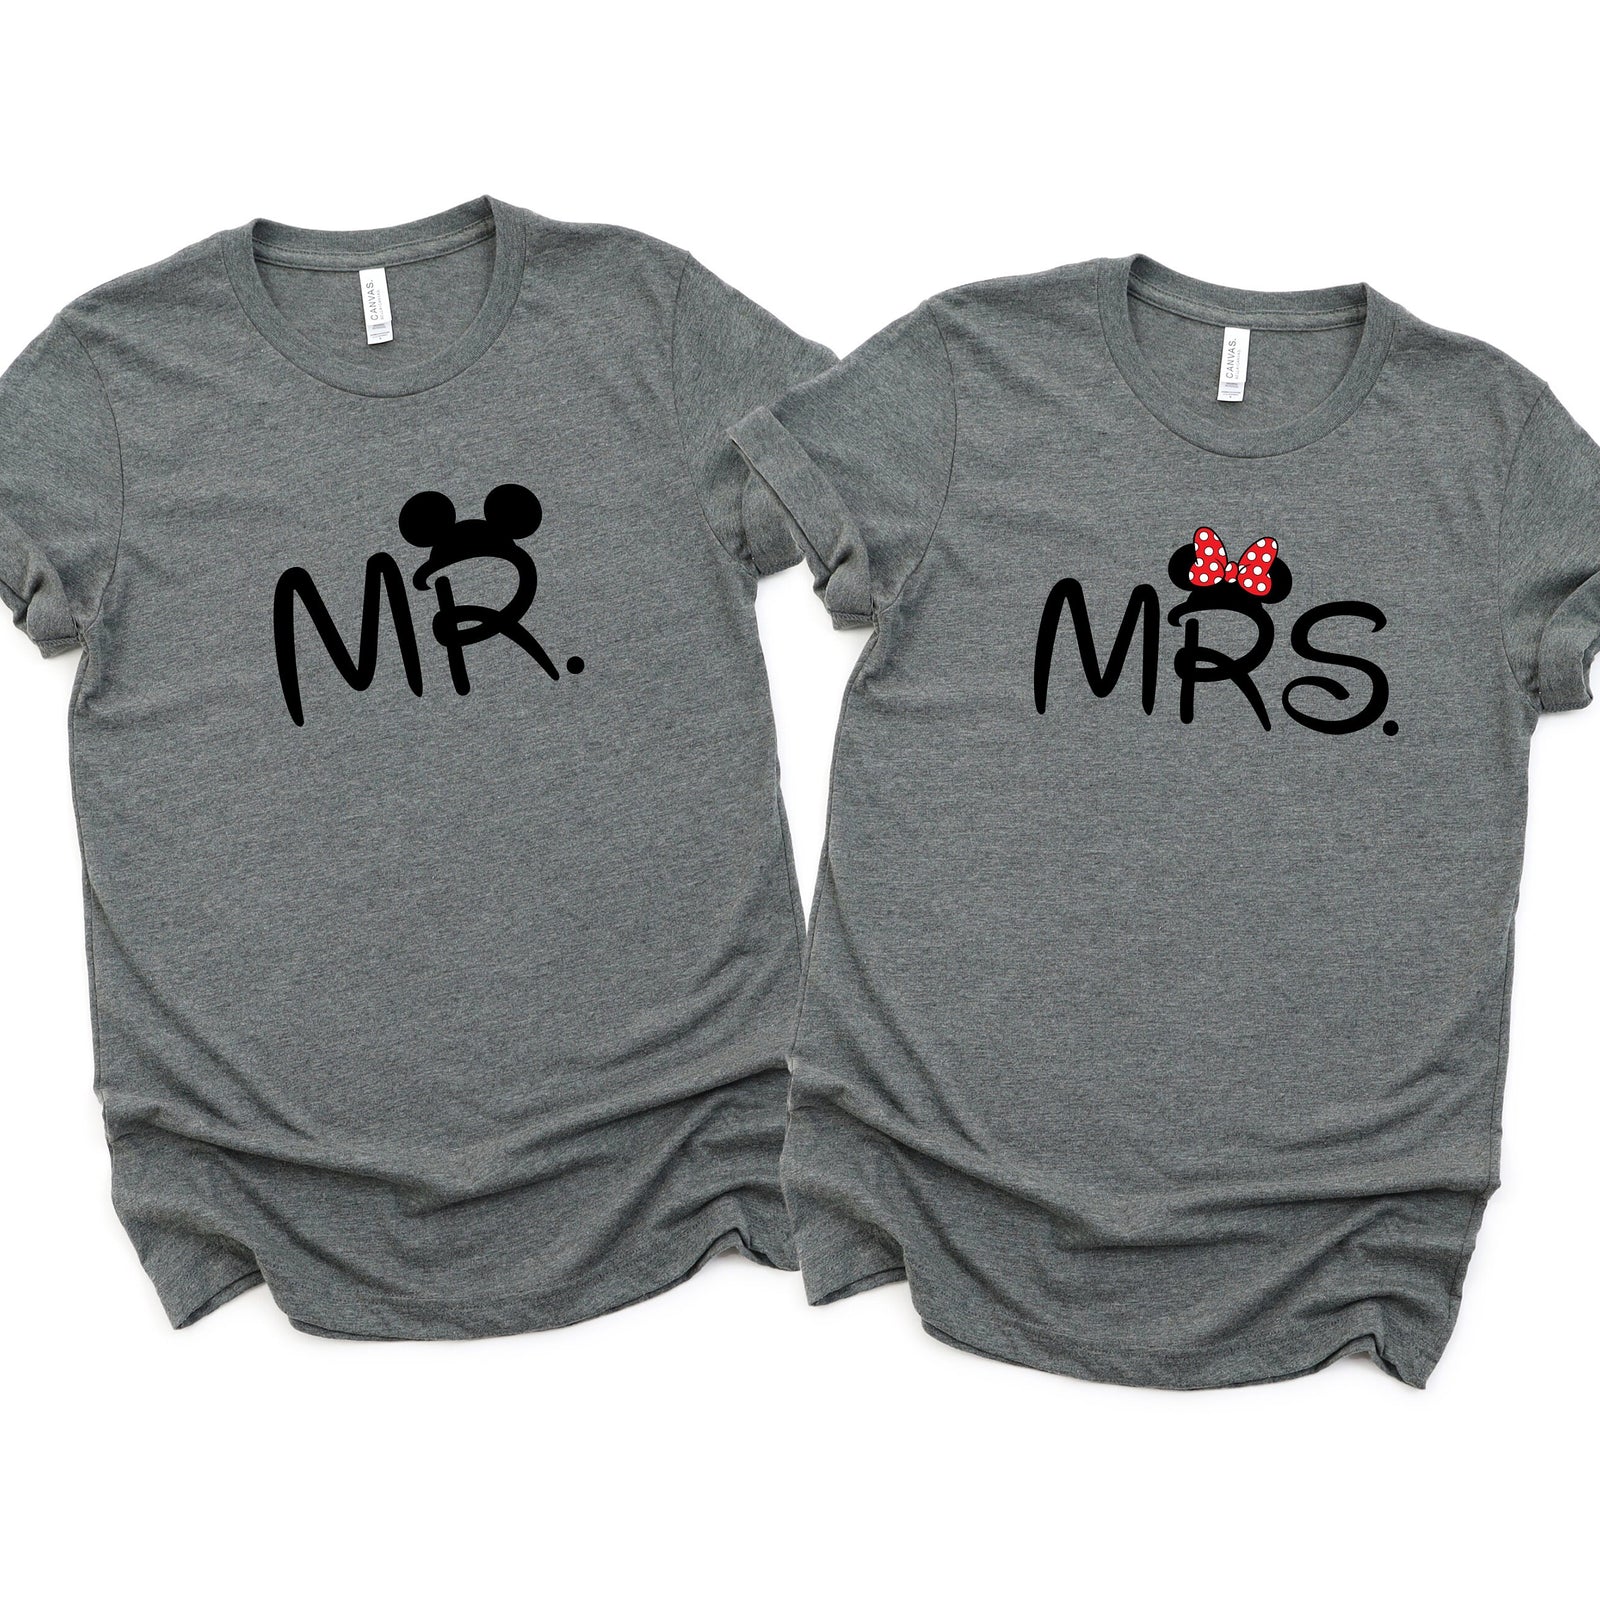 Mr. and Mrs. Minnie and Mickey Mouse Matching Disney Shirts - Disney Couples - Honeymoon - Disney Moon - Just Married